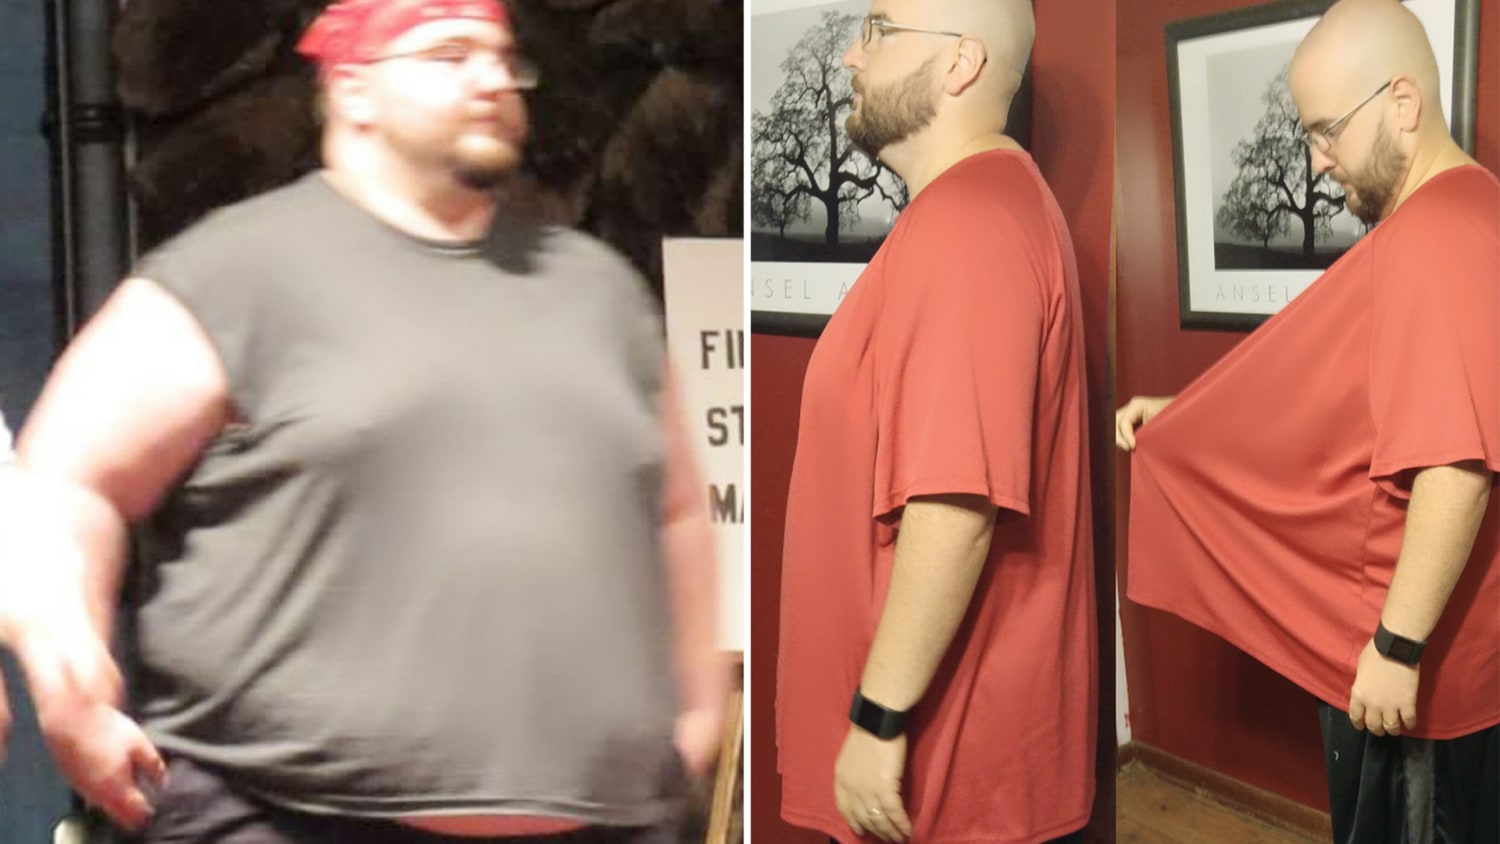 I've lost 130 lbs. I'm under 200 for the first time in my adult